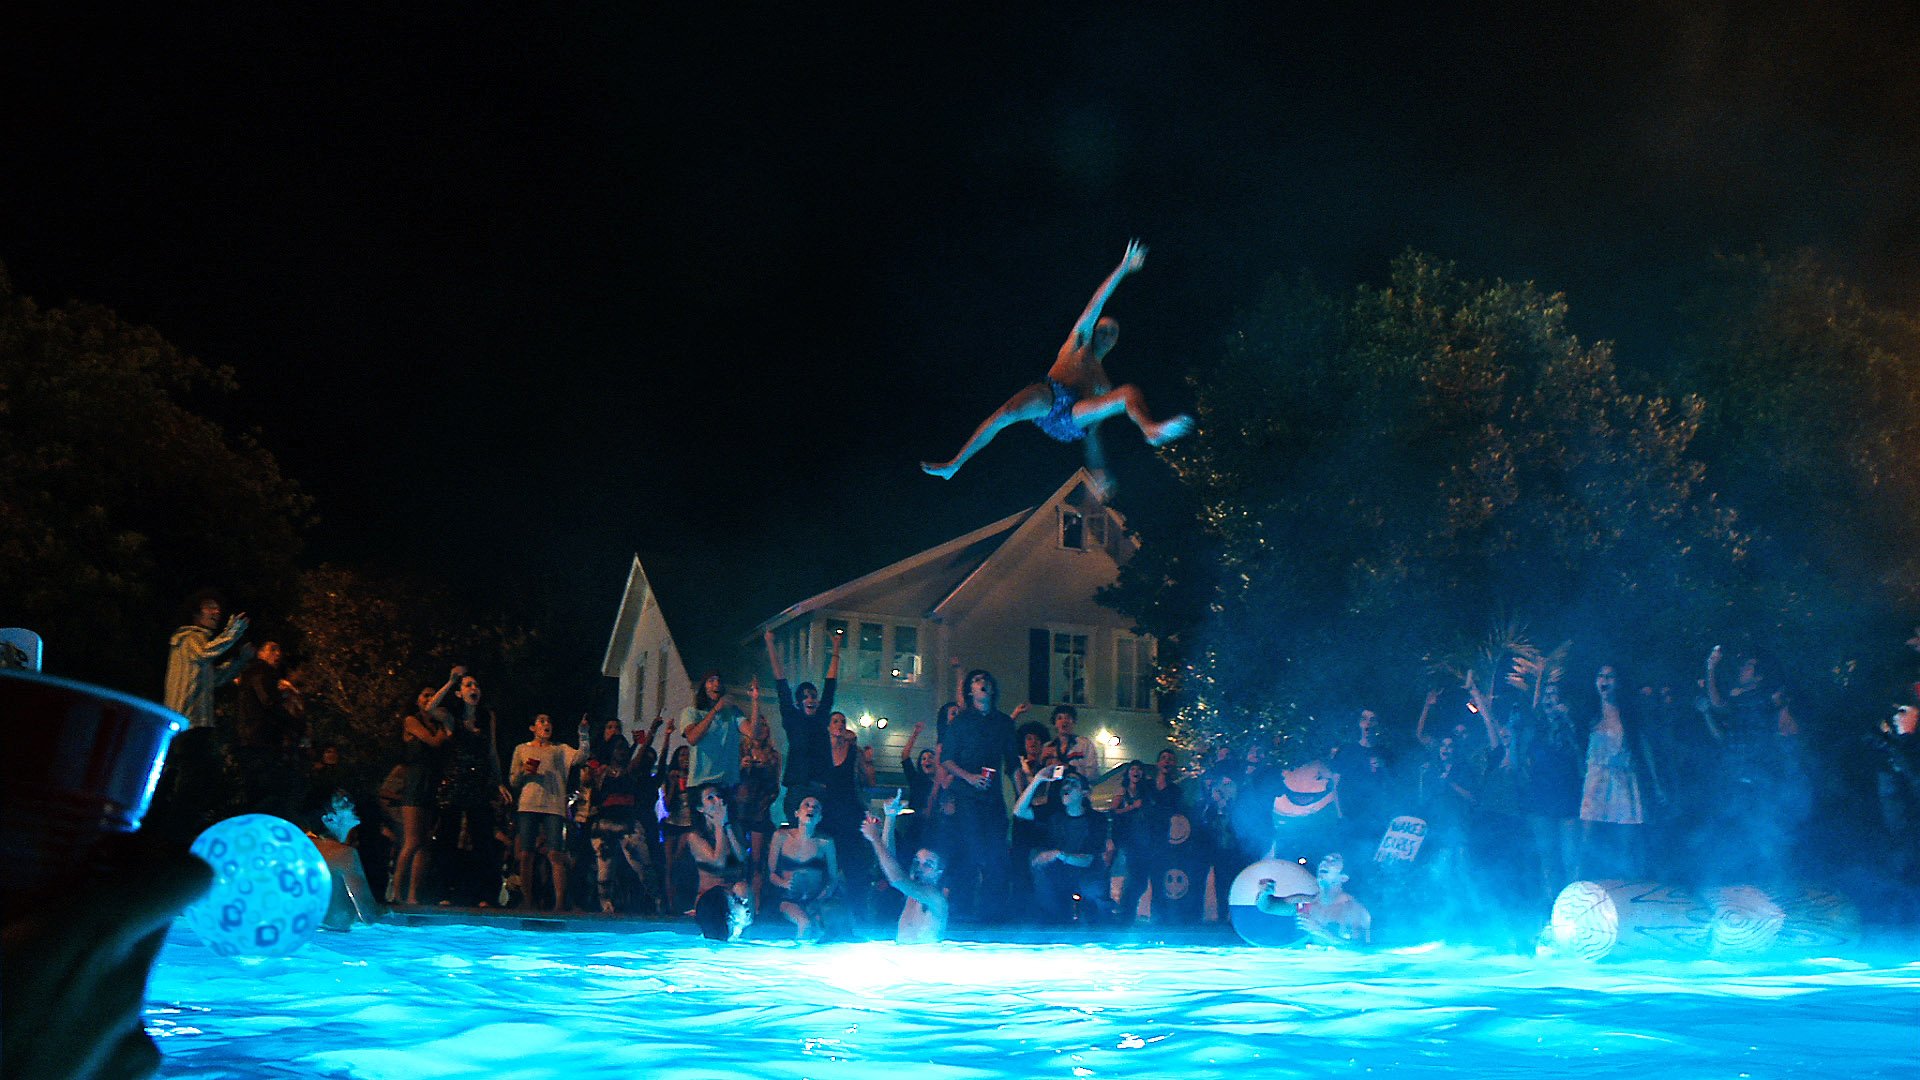 project x, Crowd, Party, Pool, Extreme, Mood, Beer, Drink Wallpaper